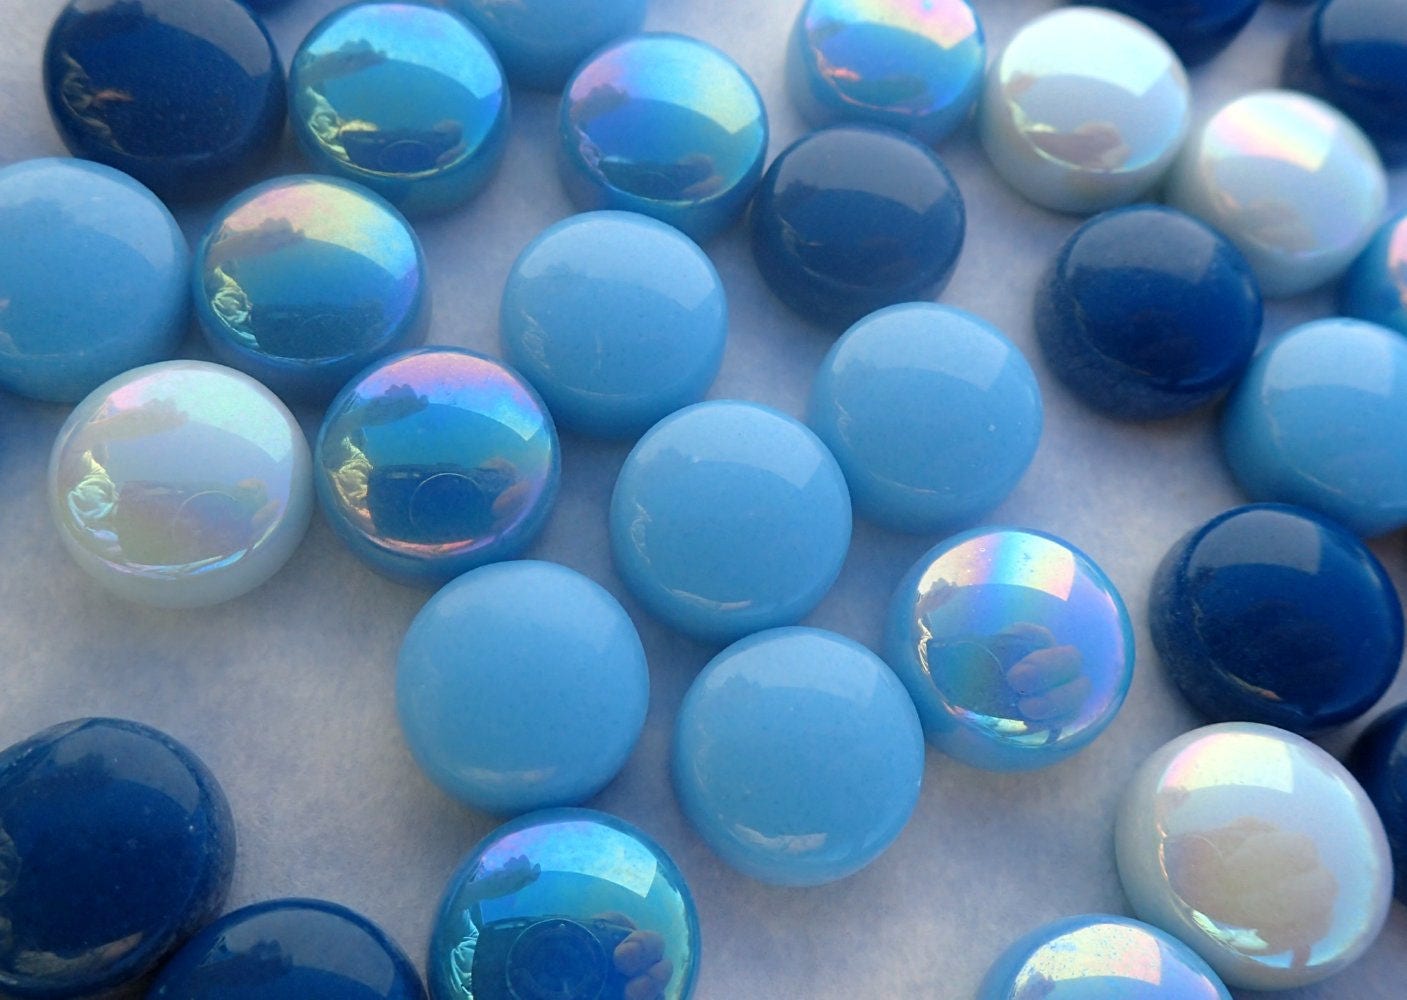 Got the Blues Mix Glass Drops Mosaic Tiles - 100 grams Vase Fillers - Mix of Gloss and Iridescent 12mm Glass Gems - Over 60 Tiles